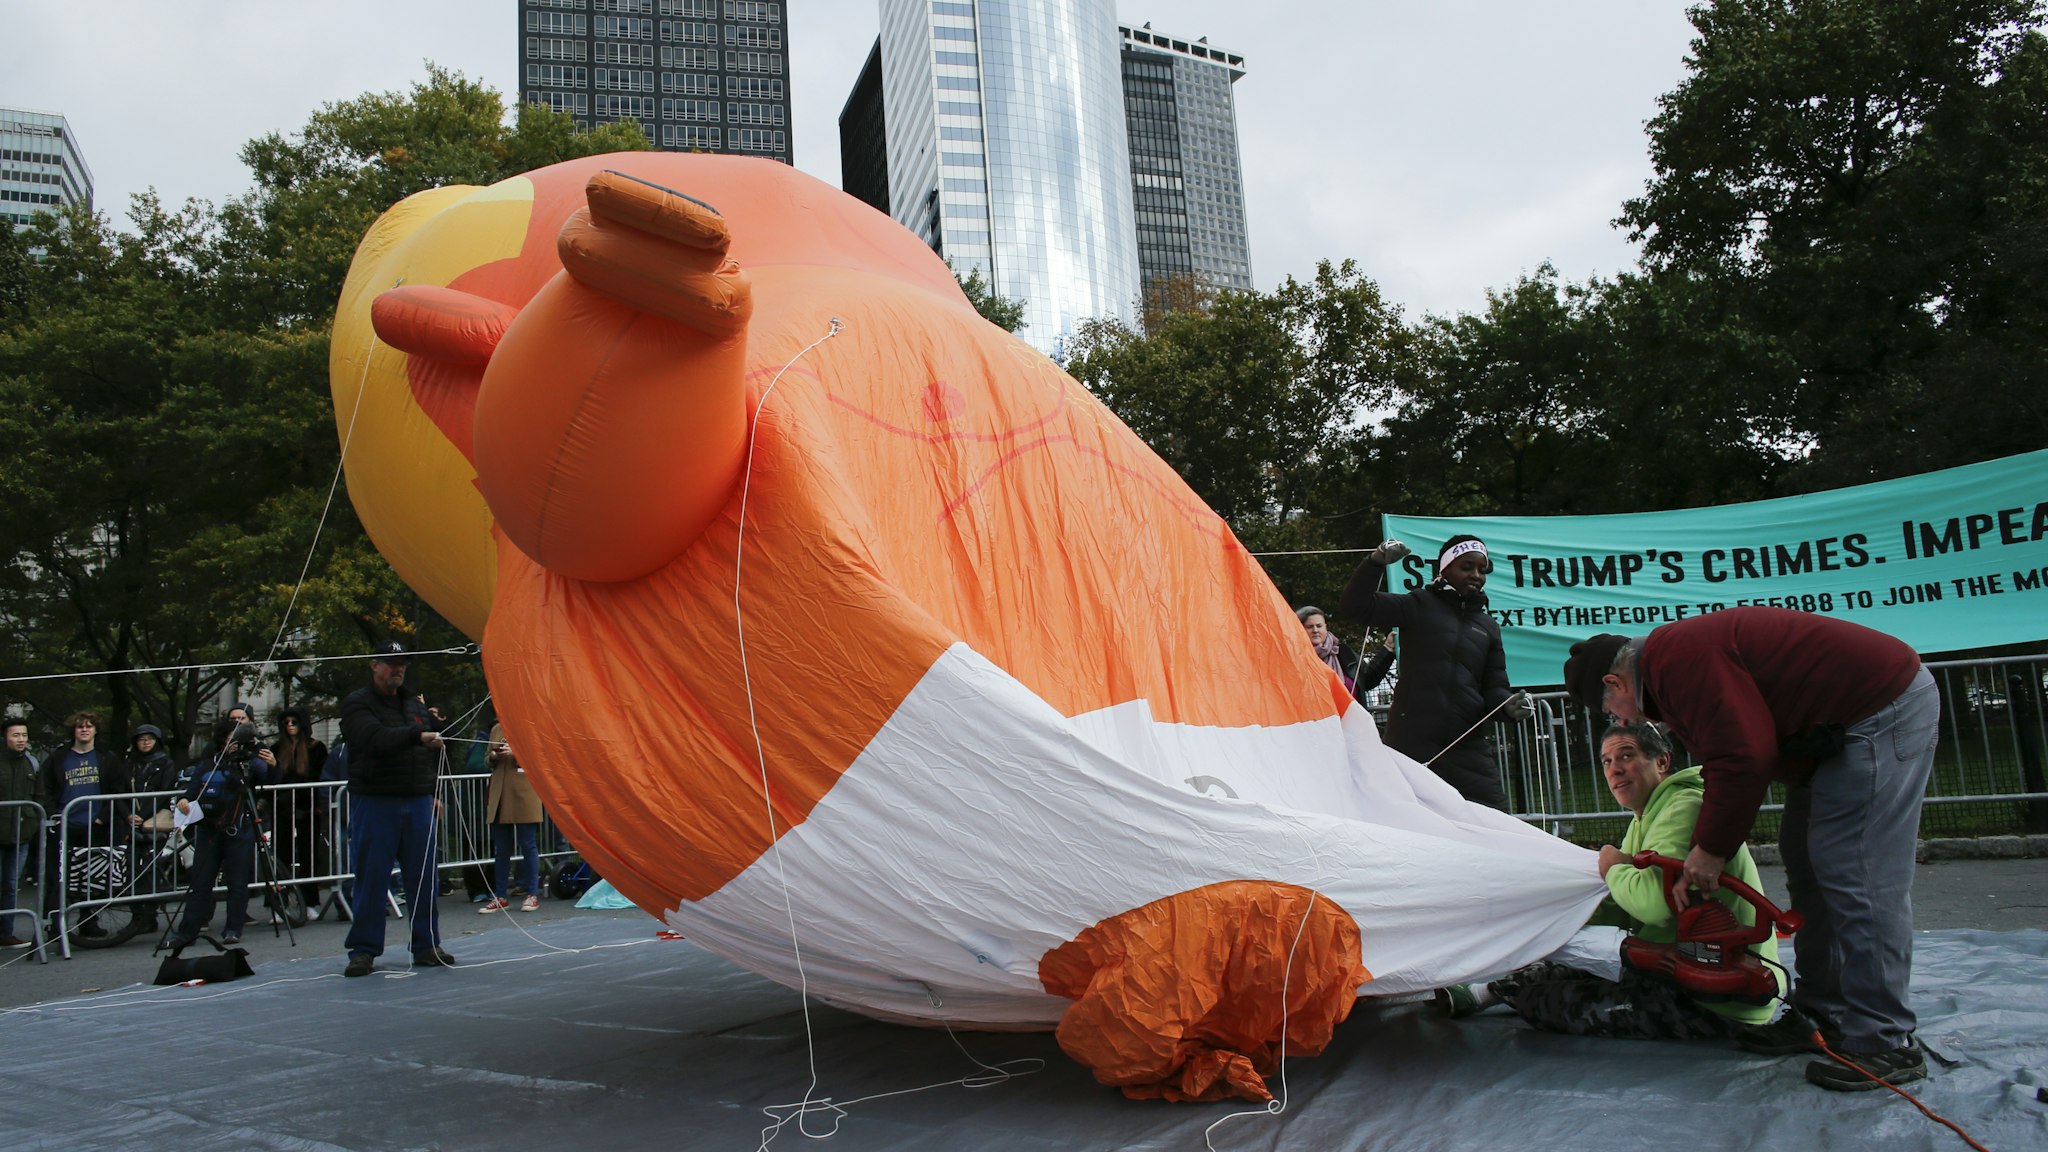 The Baby Trump Balloon is unfurled as it makes an appearance in New York as part of an "Impeachment Parade" protest on October 28, 2018 in New York City. The 20-foot balloon that flew over London, Chicago and Los Angeles earlier this year made its New York debut during a protest organized by "By the People," a grassroots campaign calling for the impeachment of President Trump. (Photo by Kena Betancur/Getty Images)